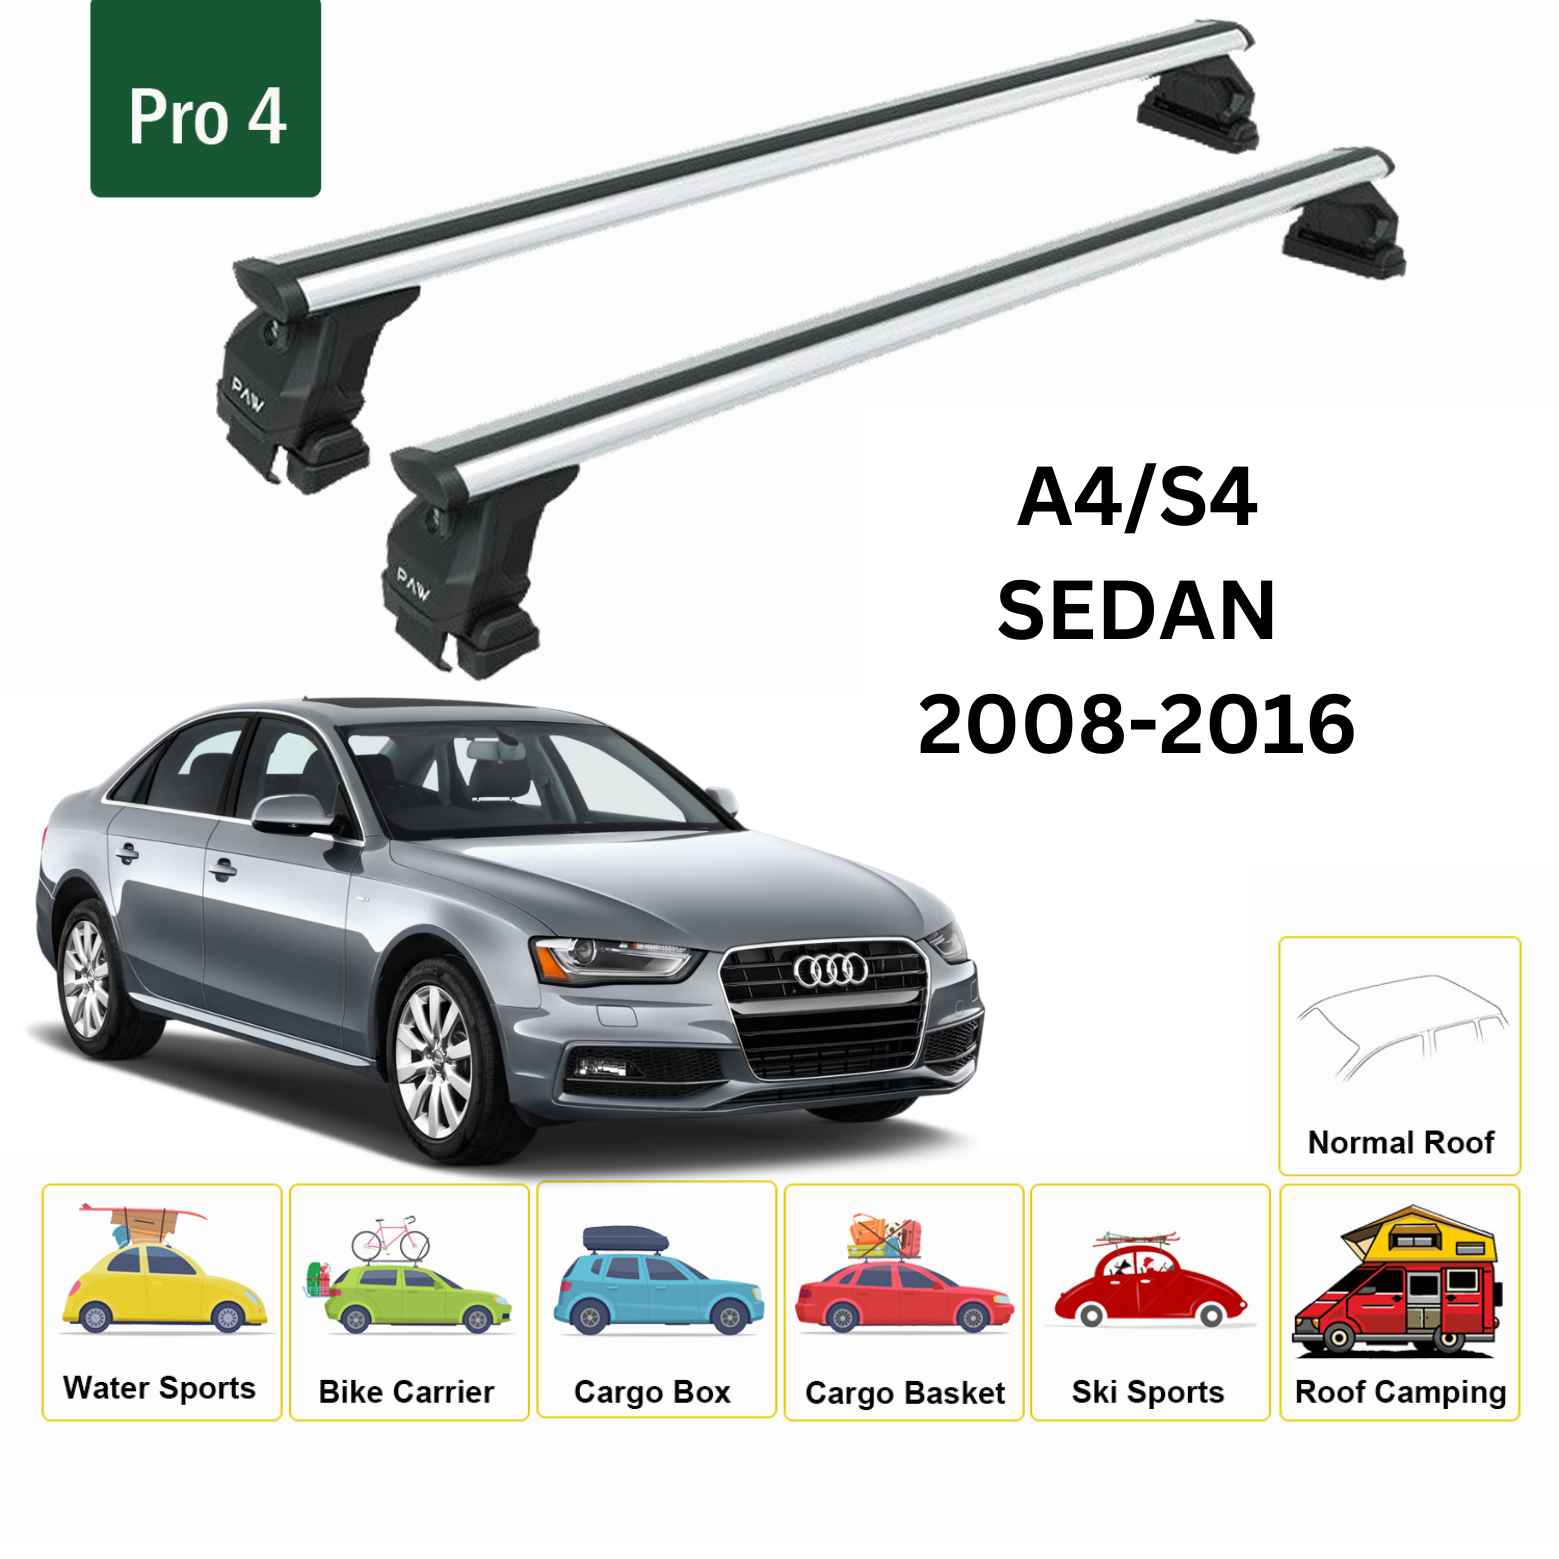 For Audi A4/S4 2008-16 Roof Rack Cross Bars Normal Roof Alu Silver - 0